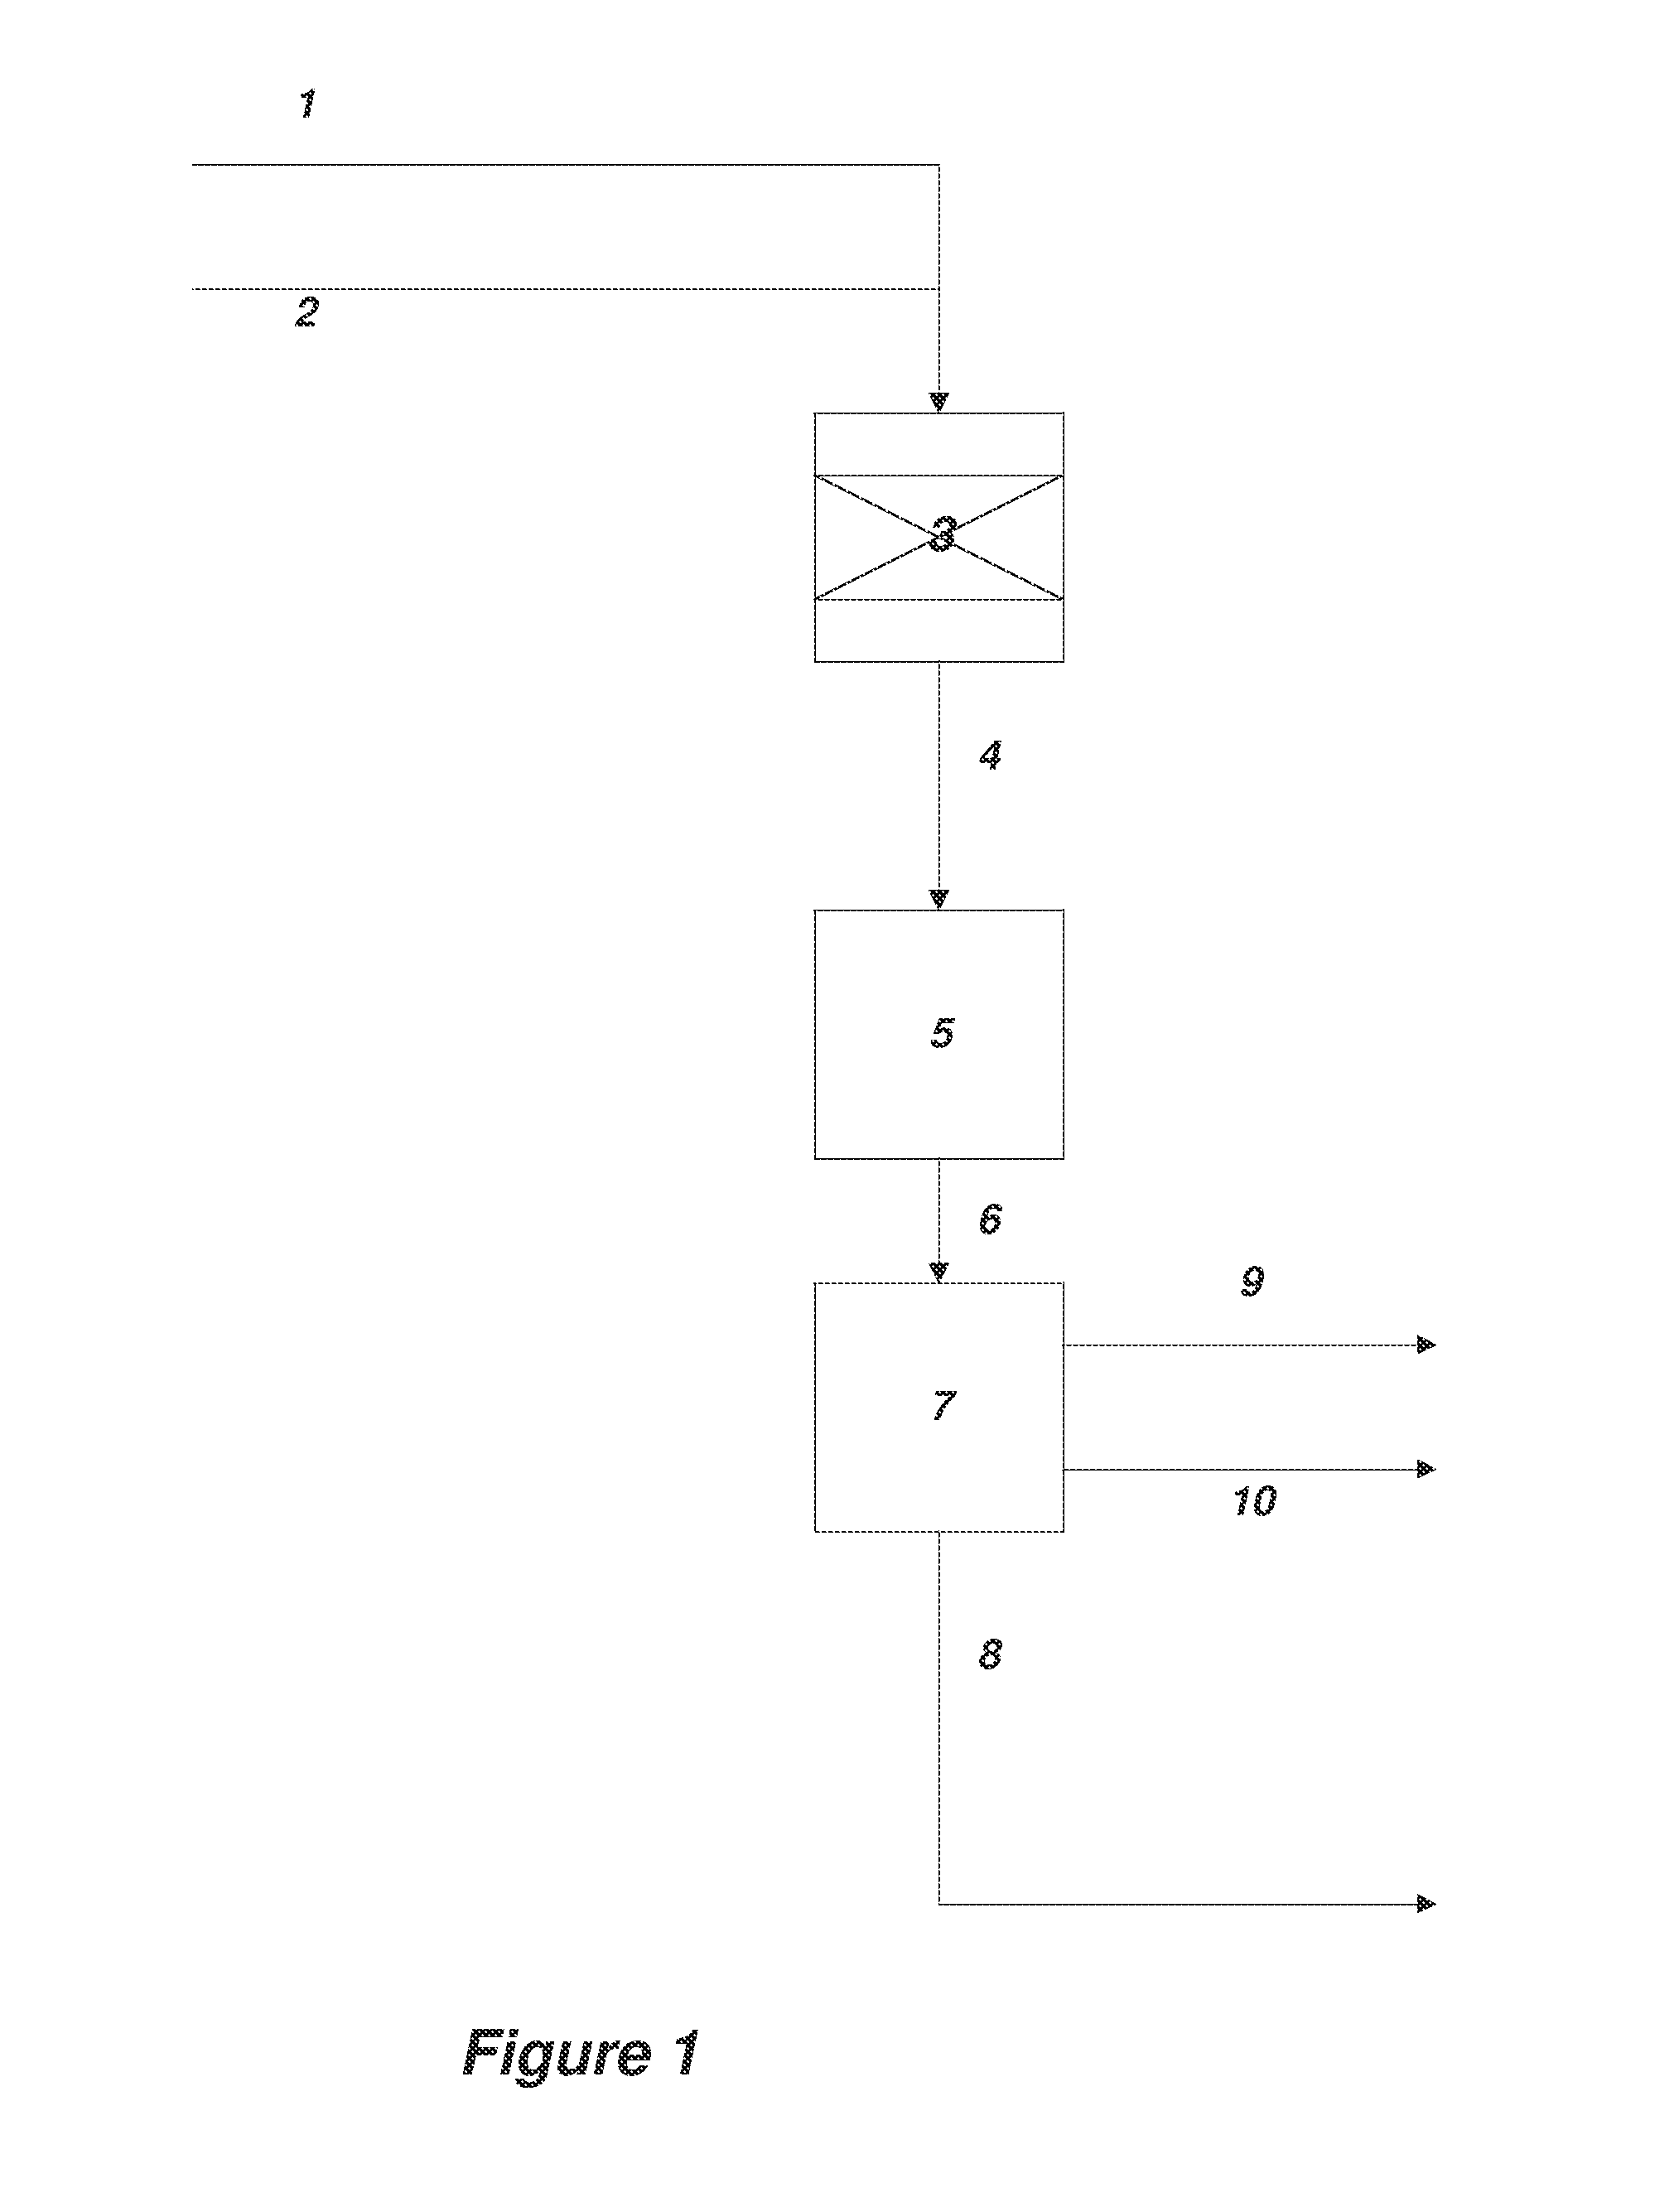 Process for production of acrylates from epoxides